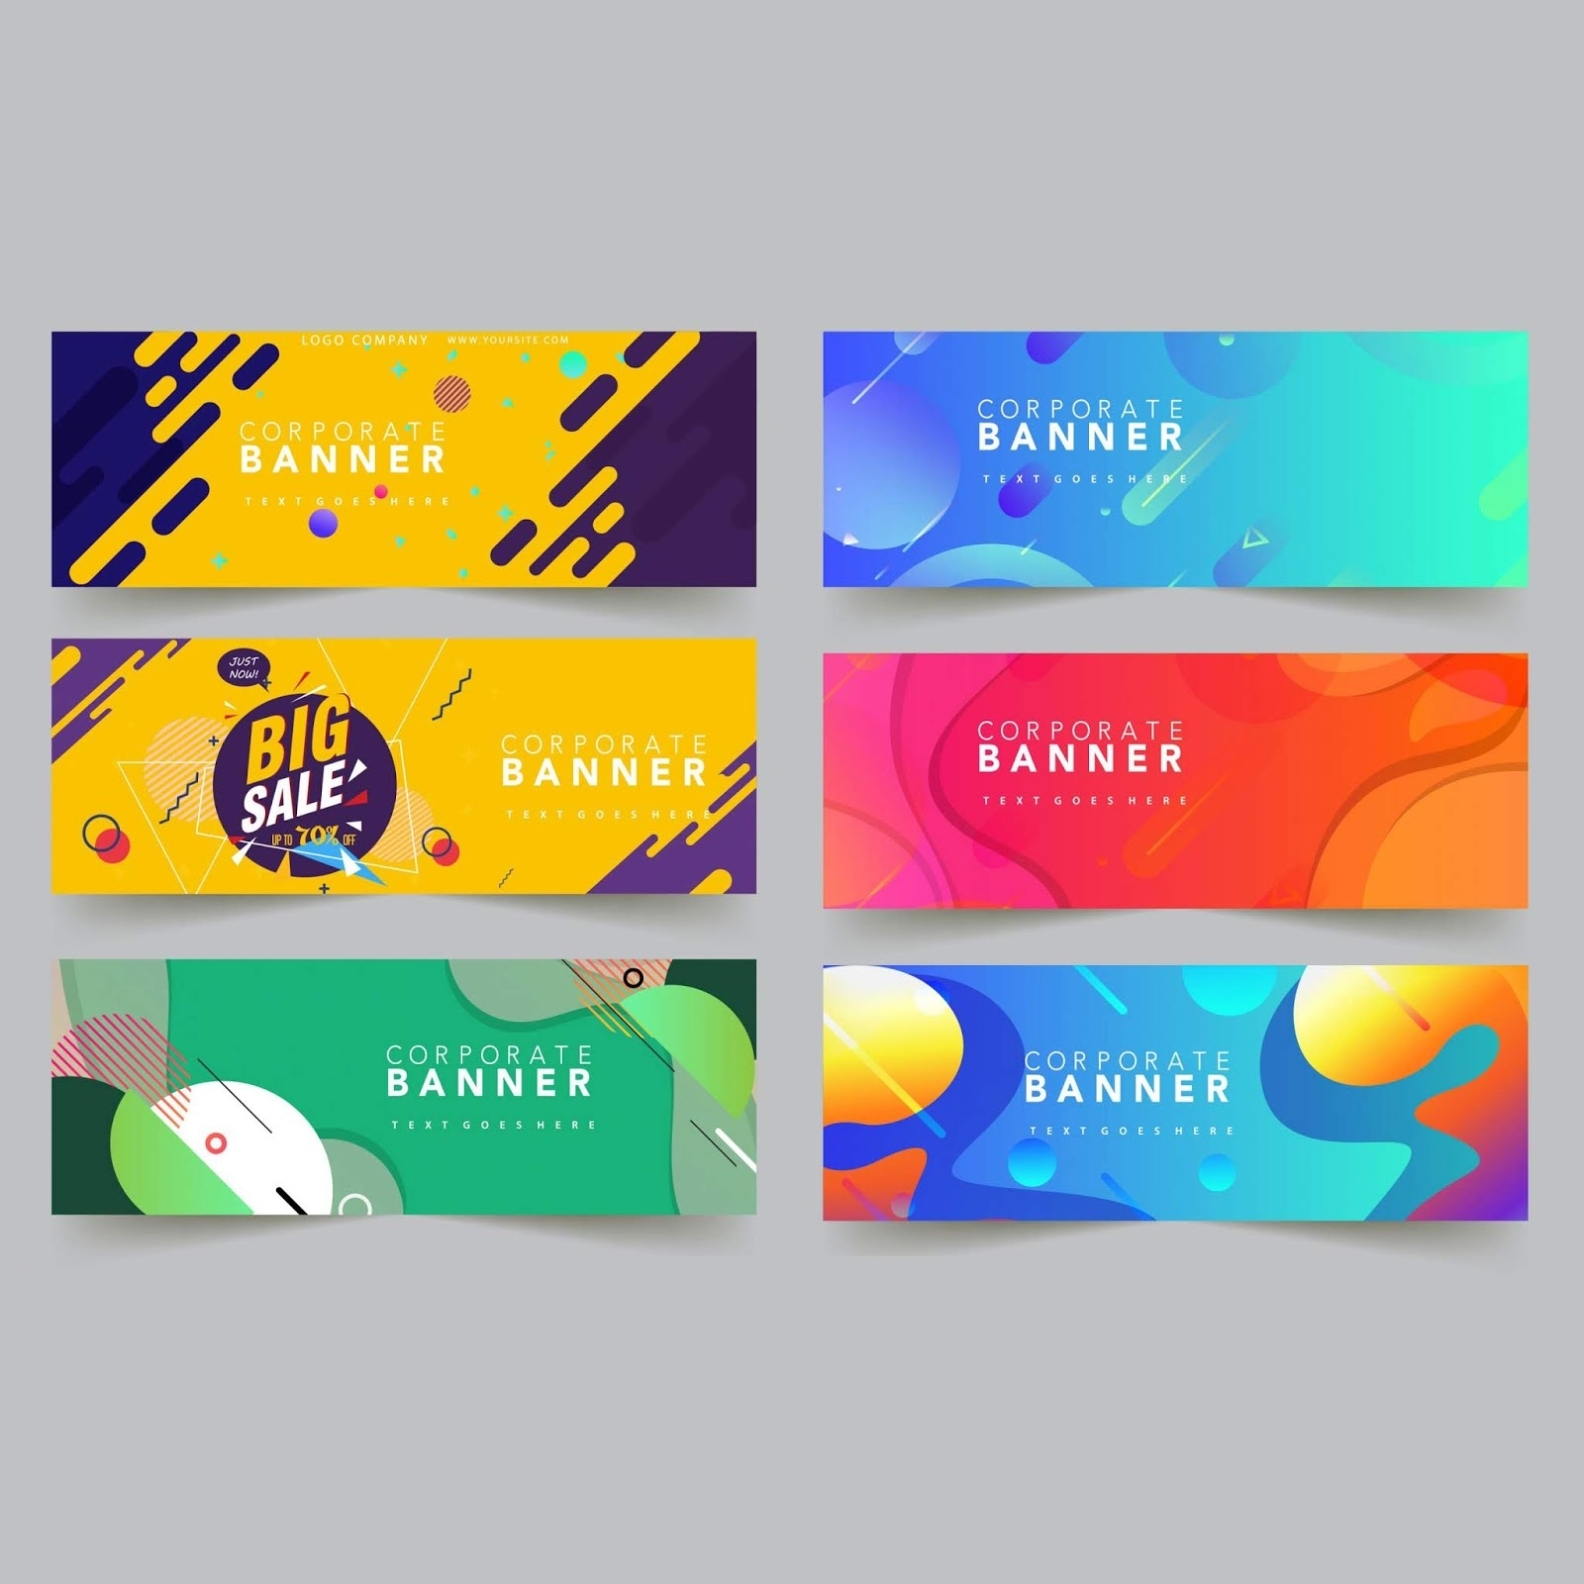 Corporate Banner Templates Colorful Modern Abstract Decor Free Vector - Vectorkh for Free Online Banner Templates